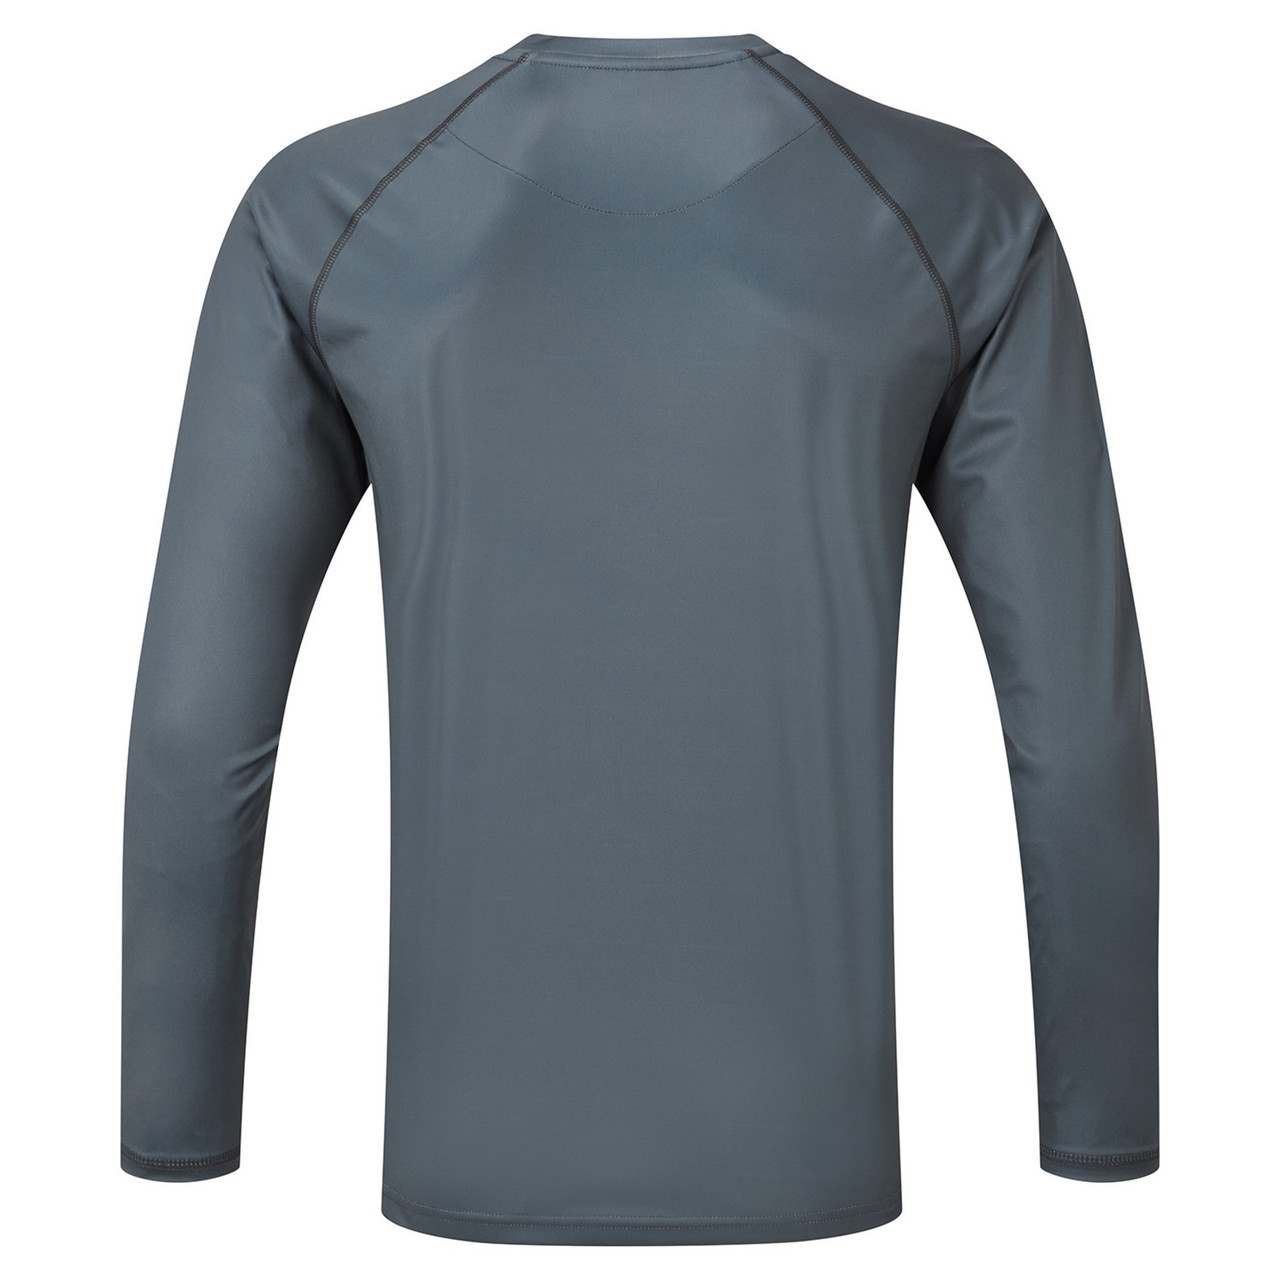 XPEL® Tec Long Sleeve Top in Pewter - Gill Marine Official US Store